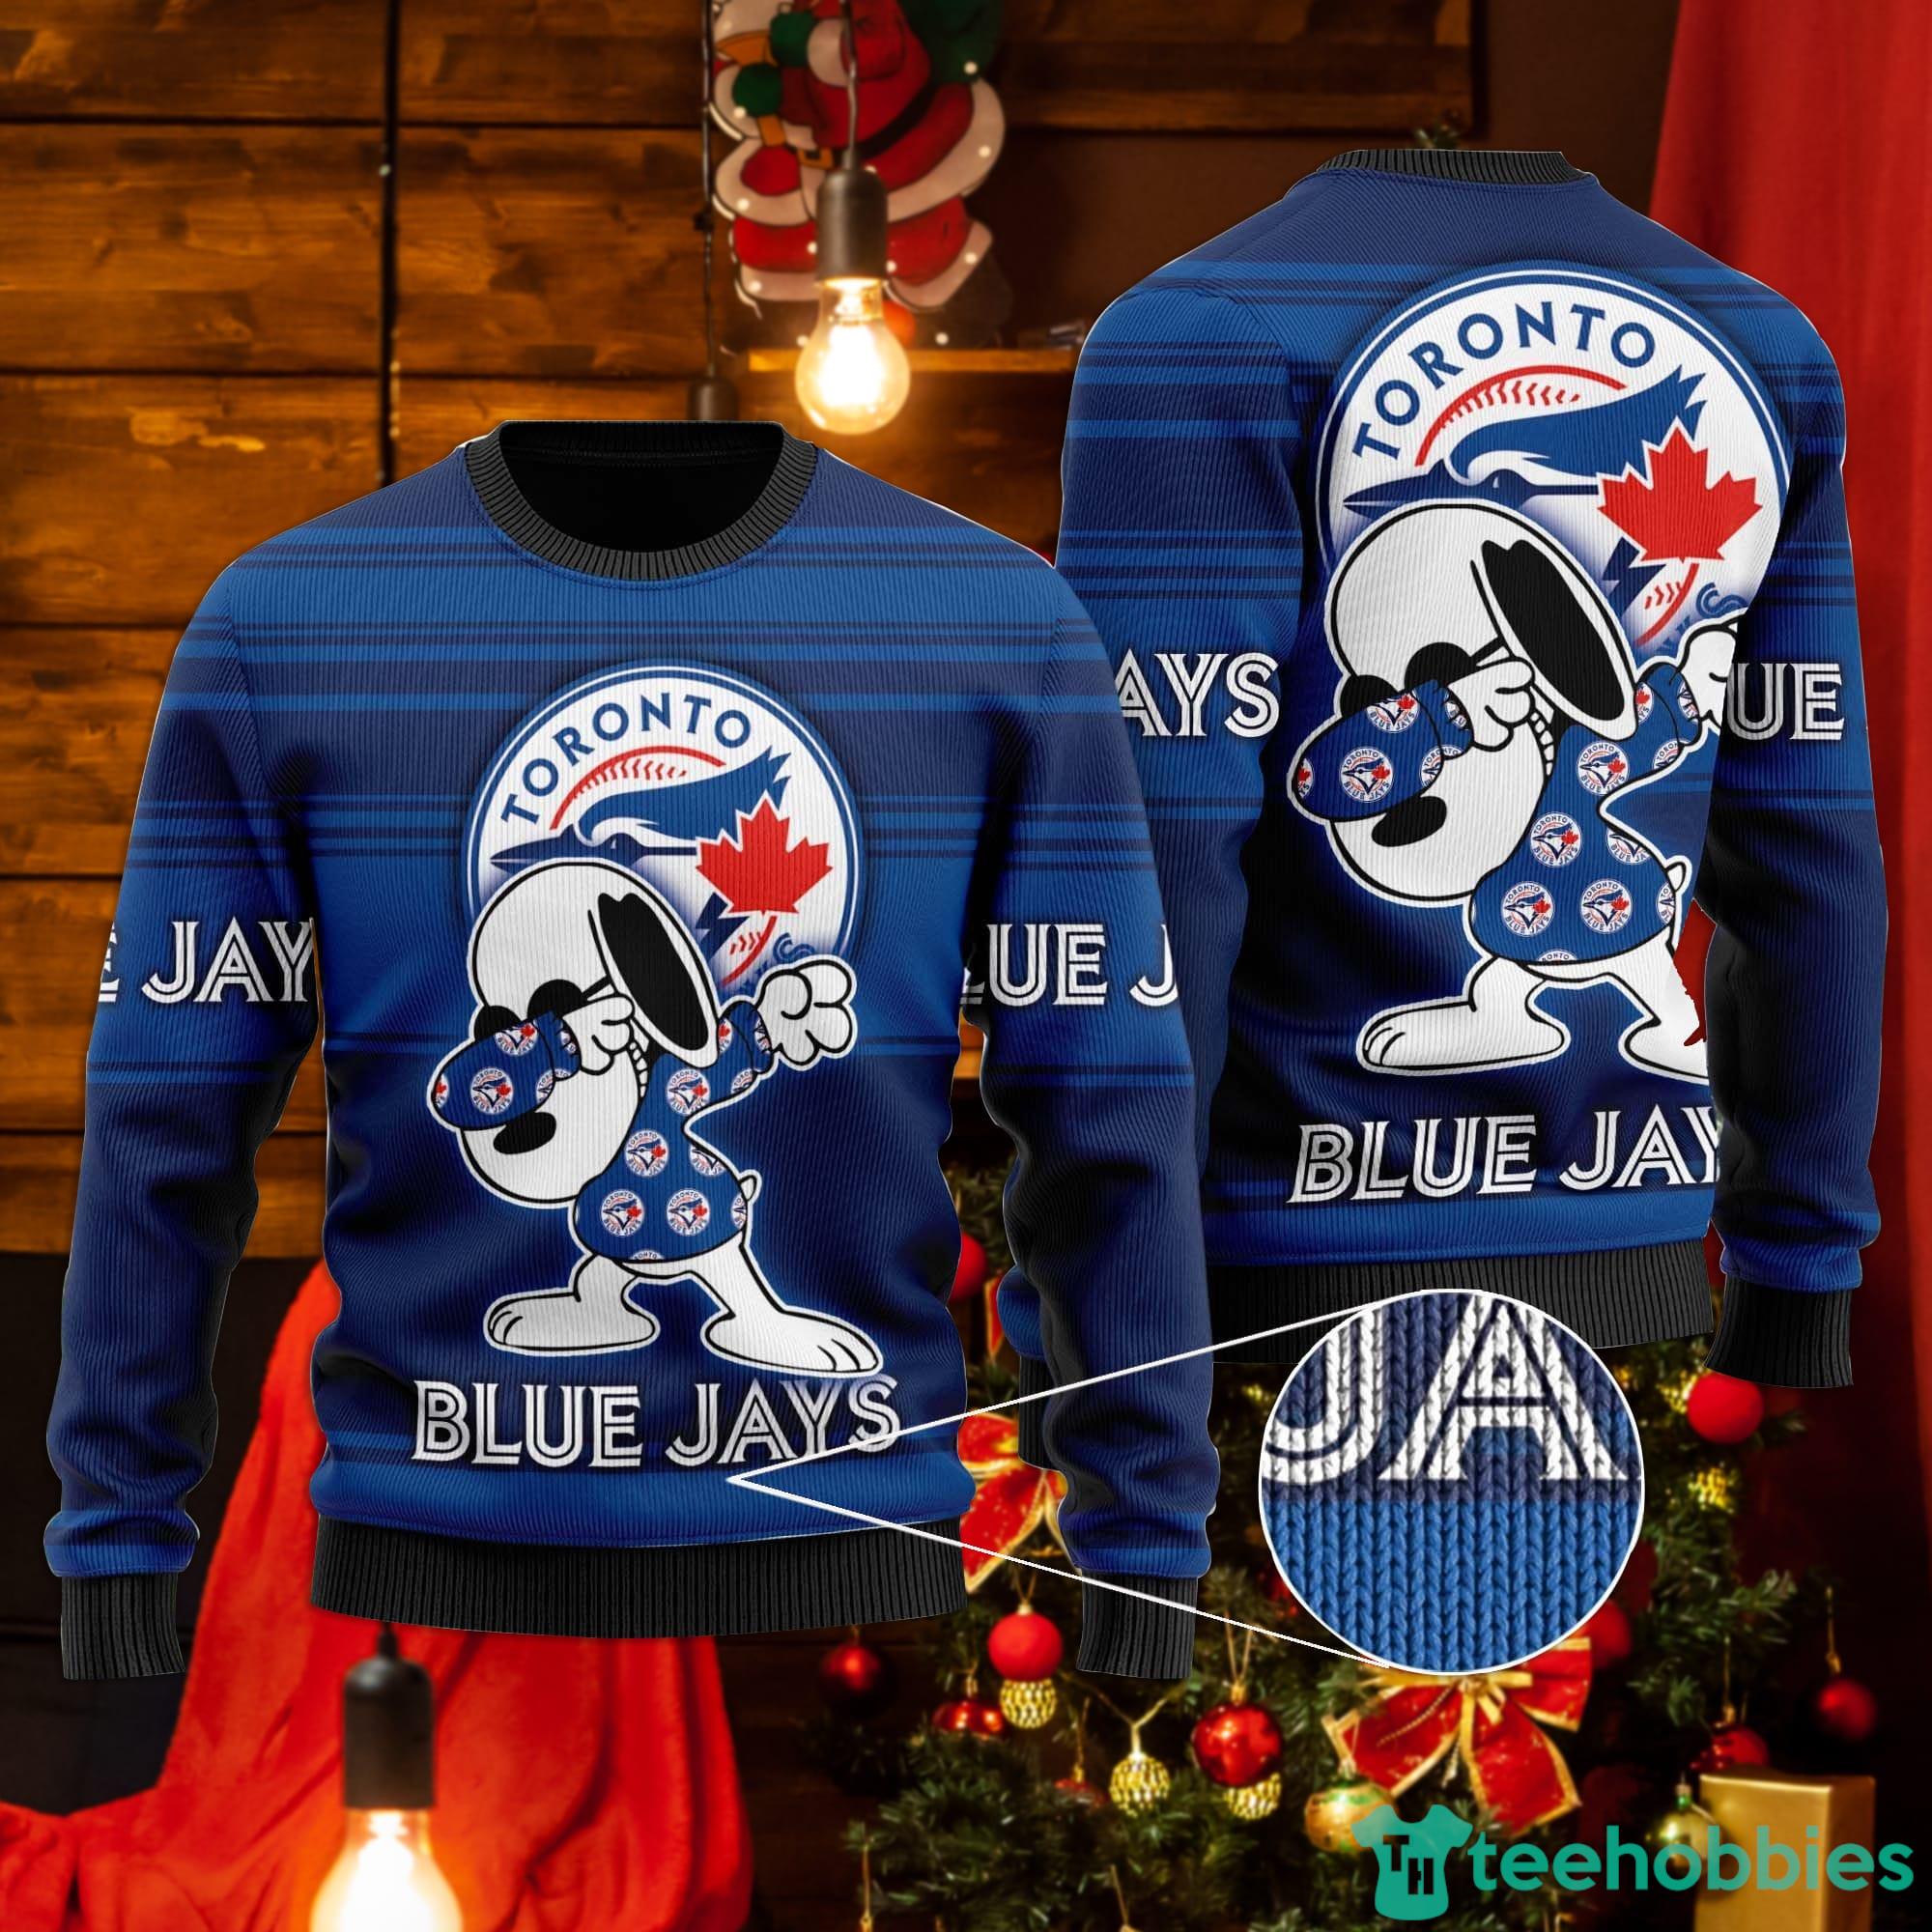 Peanuts Charlie Brown And Snoopy Playing Baseball Toronto Blue Jays shirt, sweater, hoodie, sweater, long sleeve and tank top